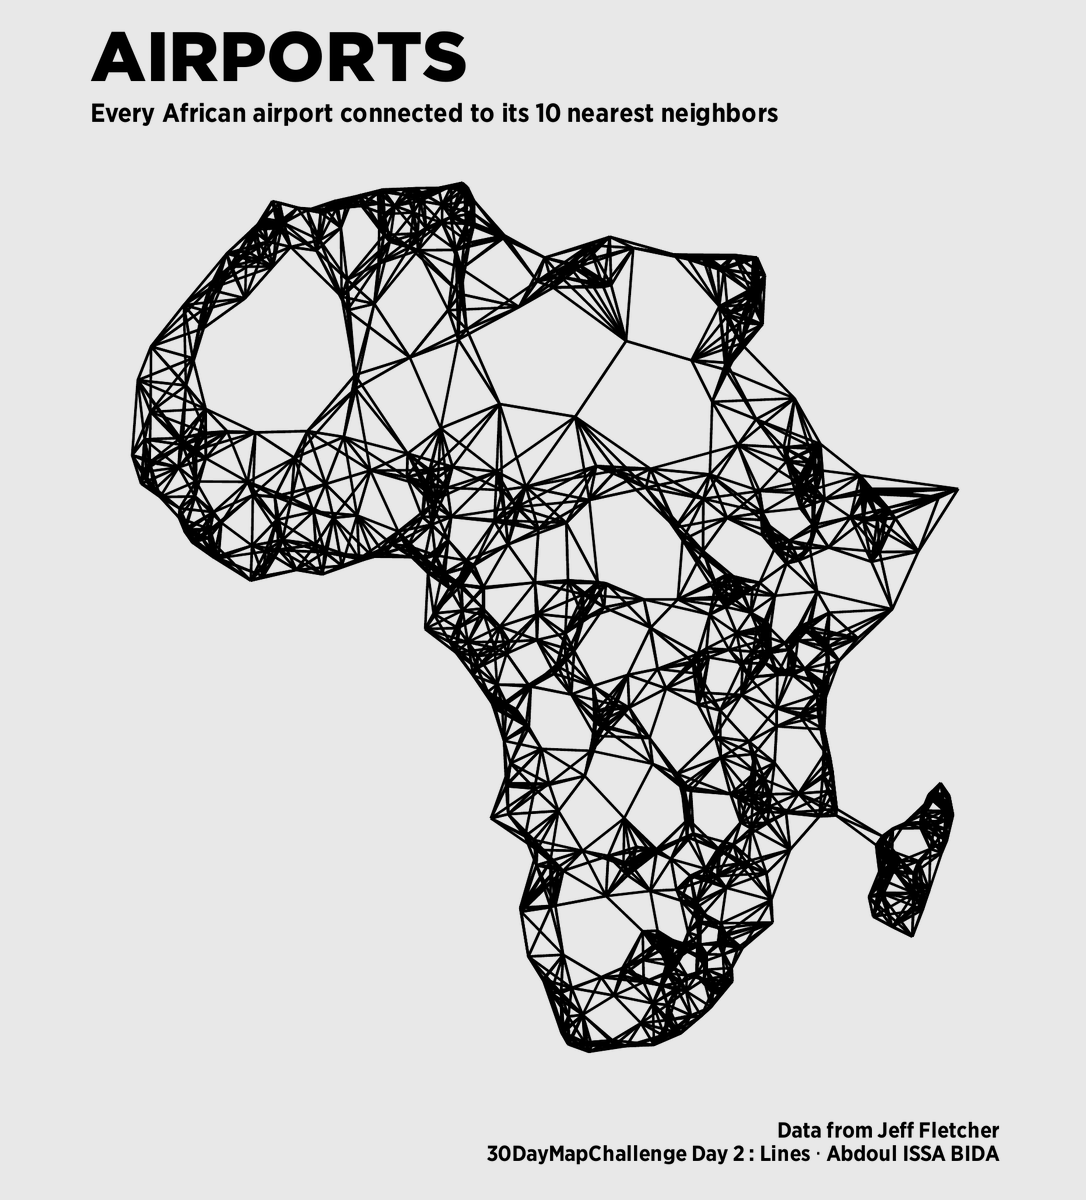 #30DayMapChallenge Day 2: Lines. Every African airport connected to its 10 nearest neighbors. HD graphic and #RStats code: github.com/AbdoulMa/30Day… #dataviz #GIS #maps